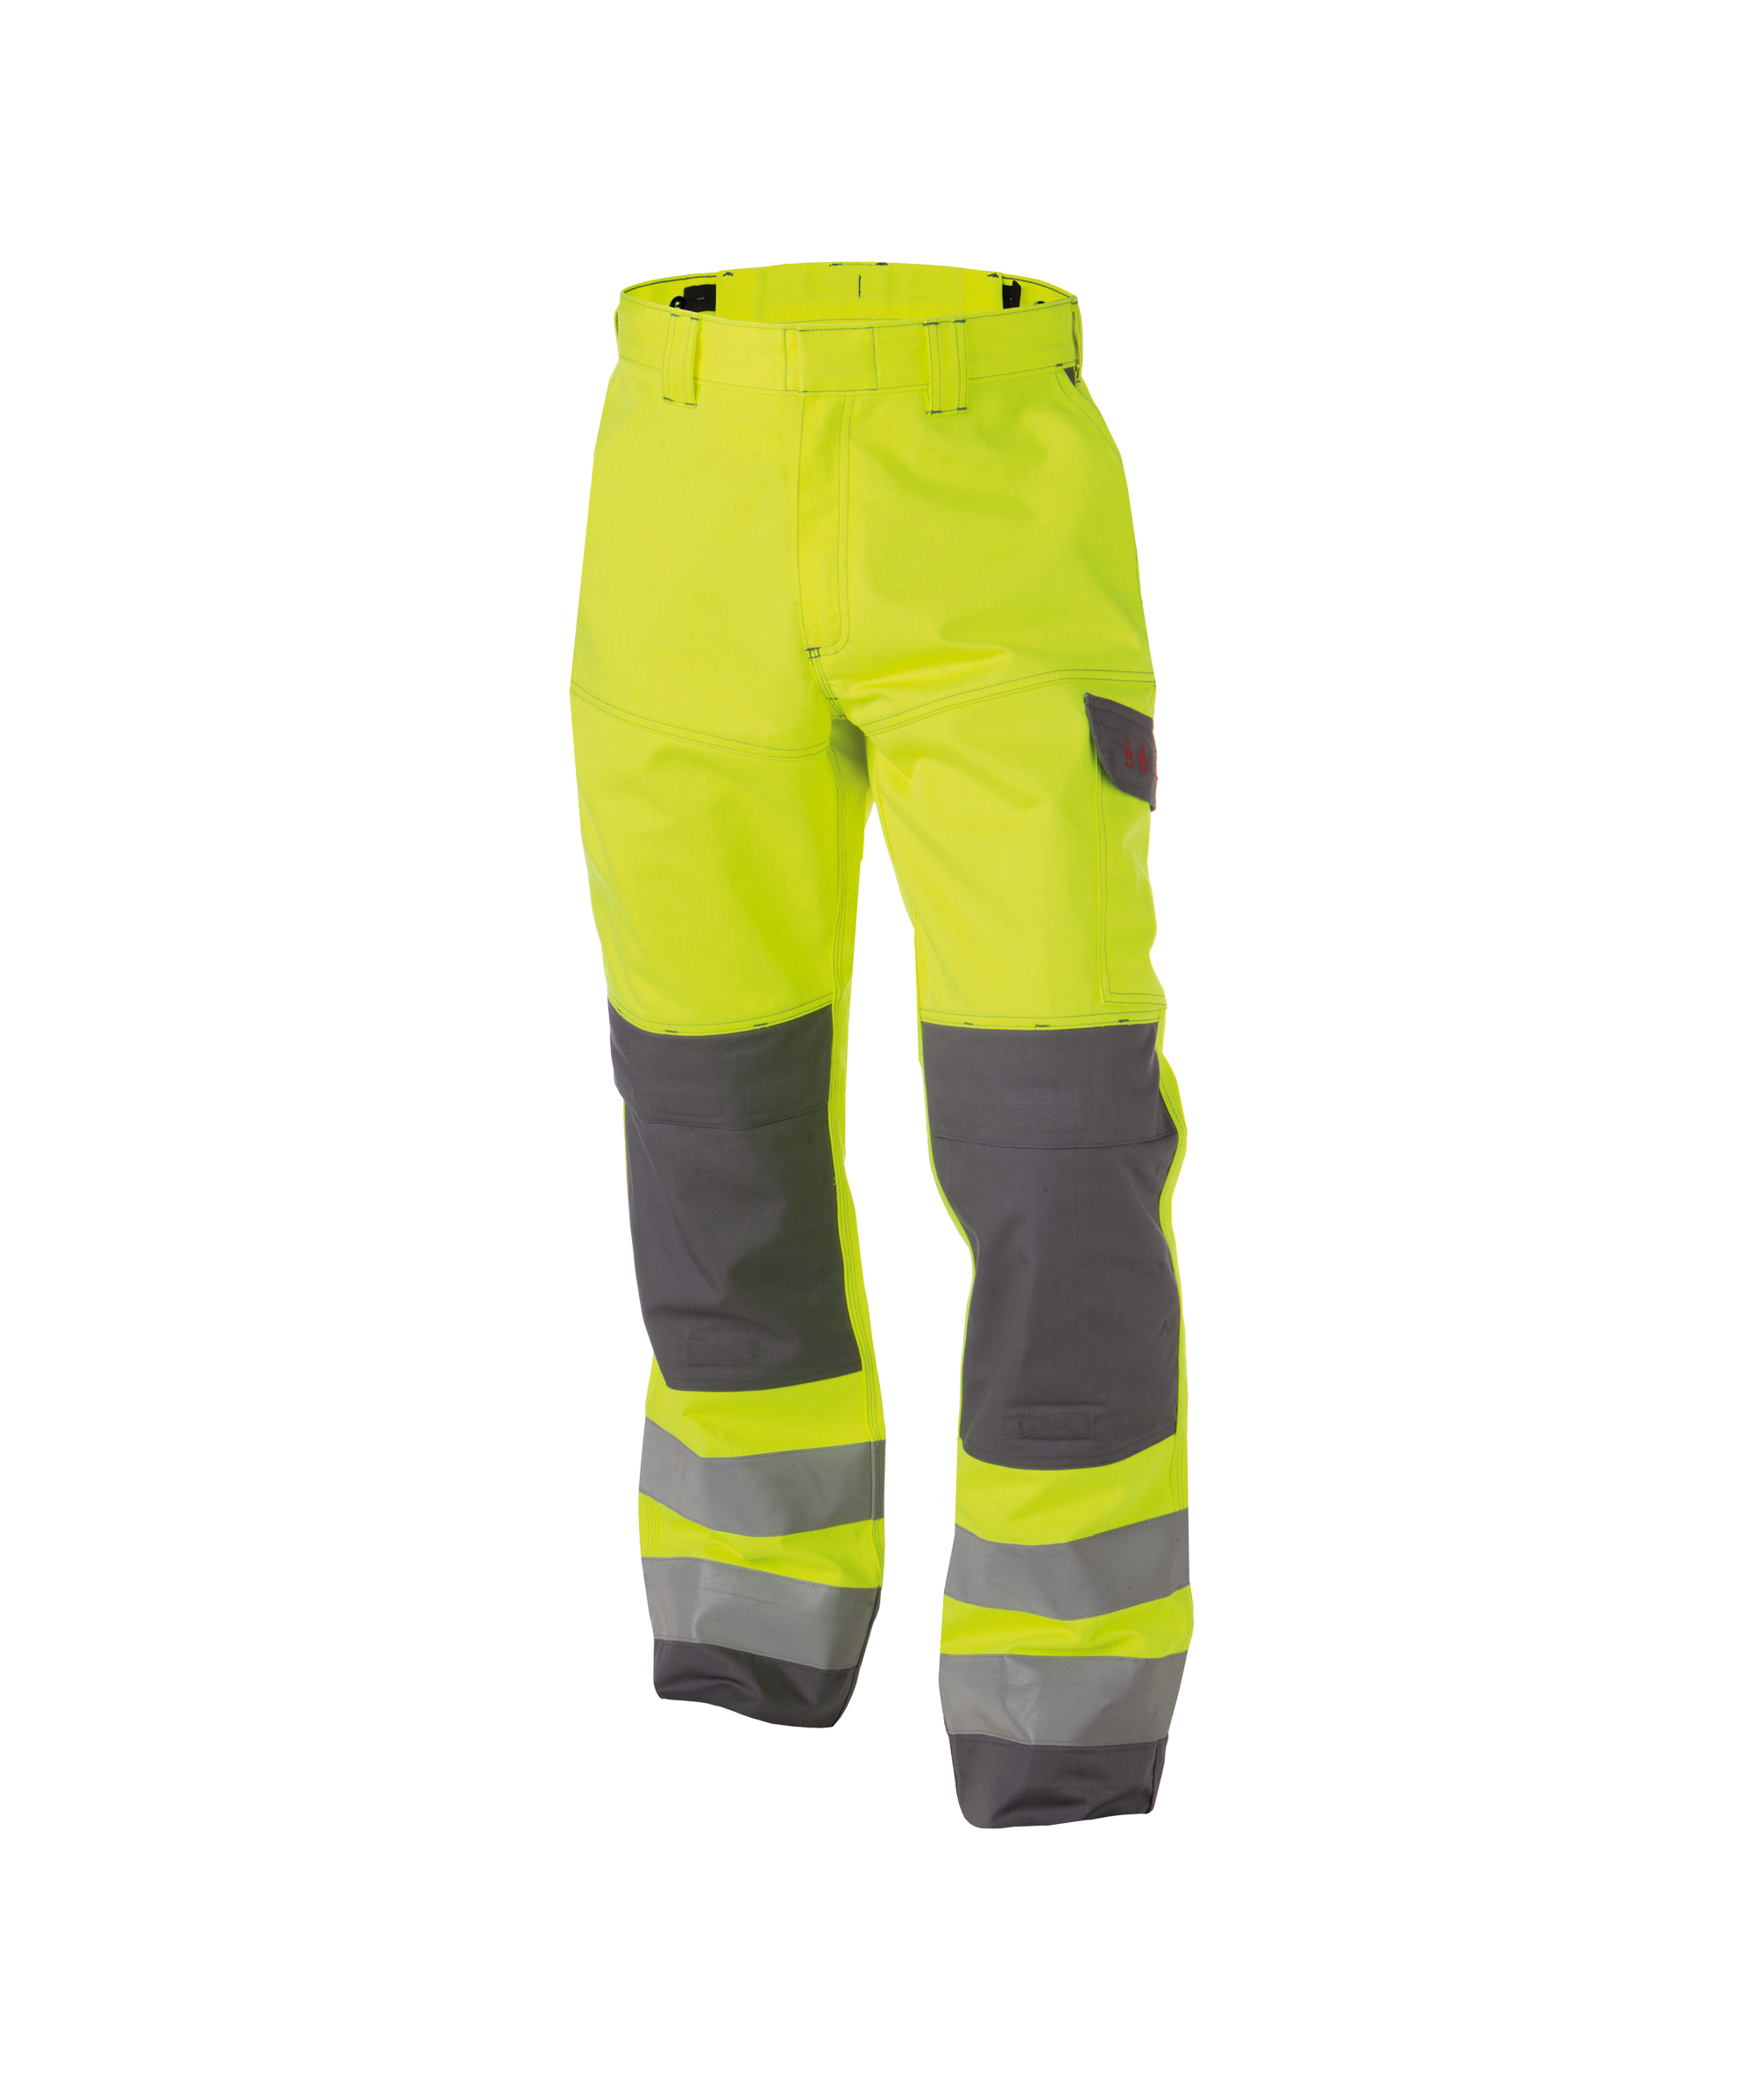 manchester_two-tone-multinorm-high-visibility-work-trousers-with-knee-pockets_fluo-yellow-graphite-grey_front.jpg